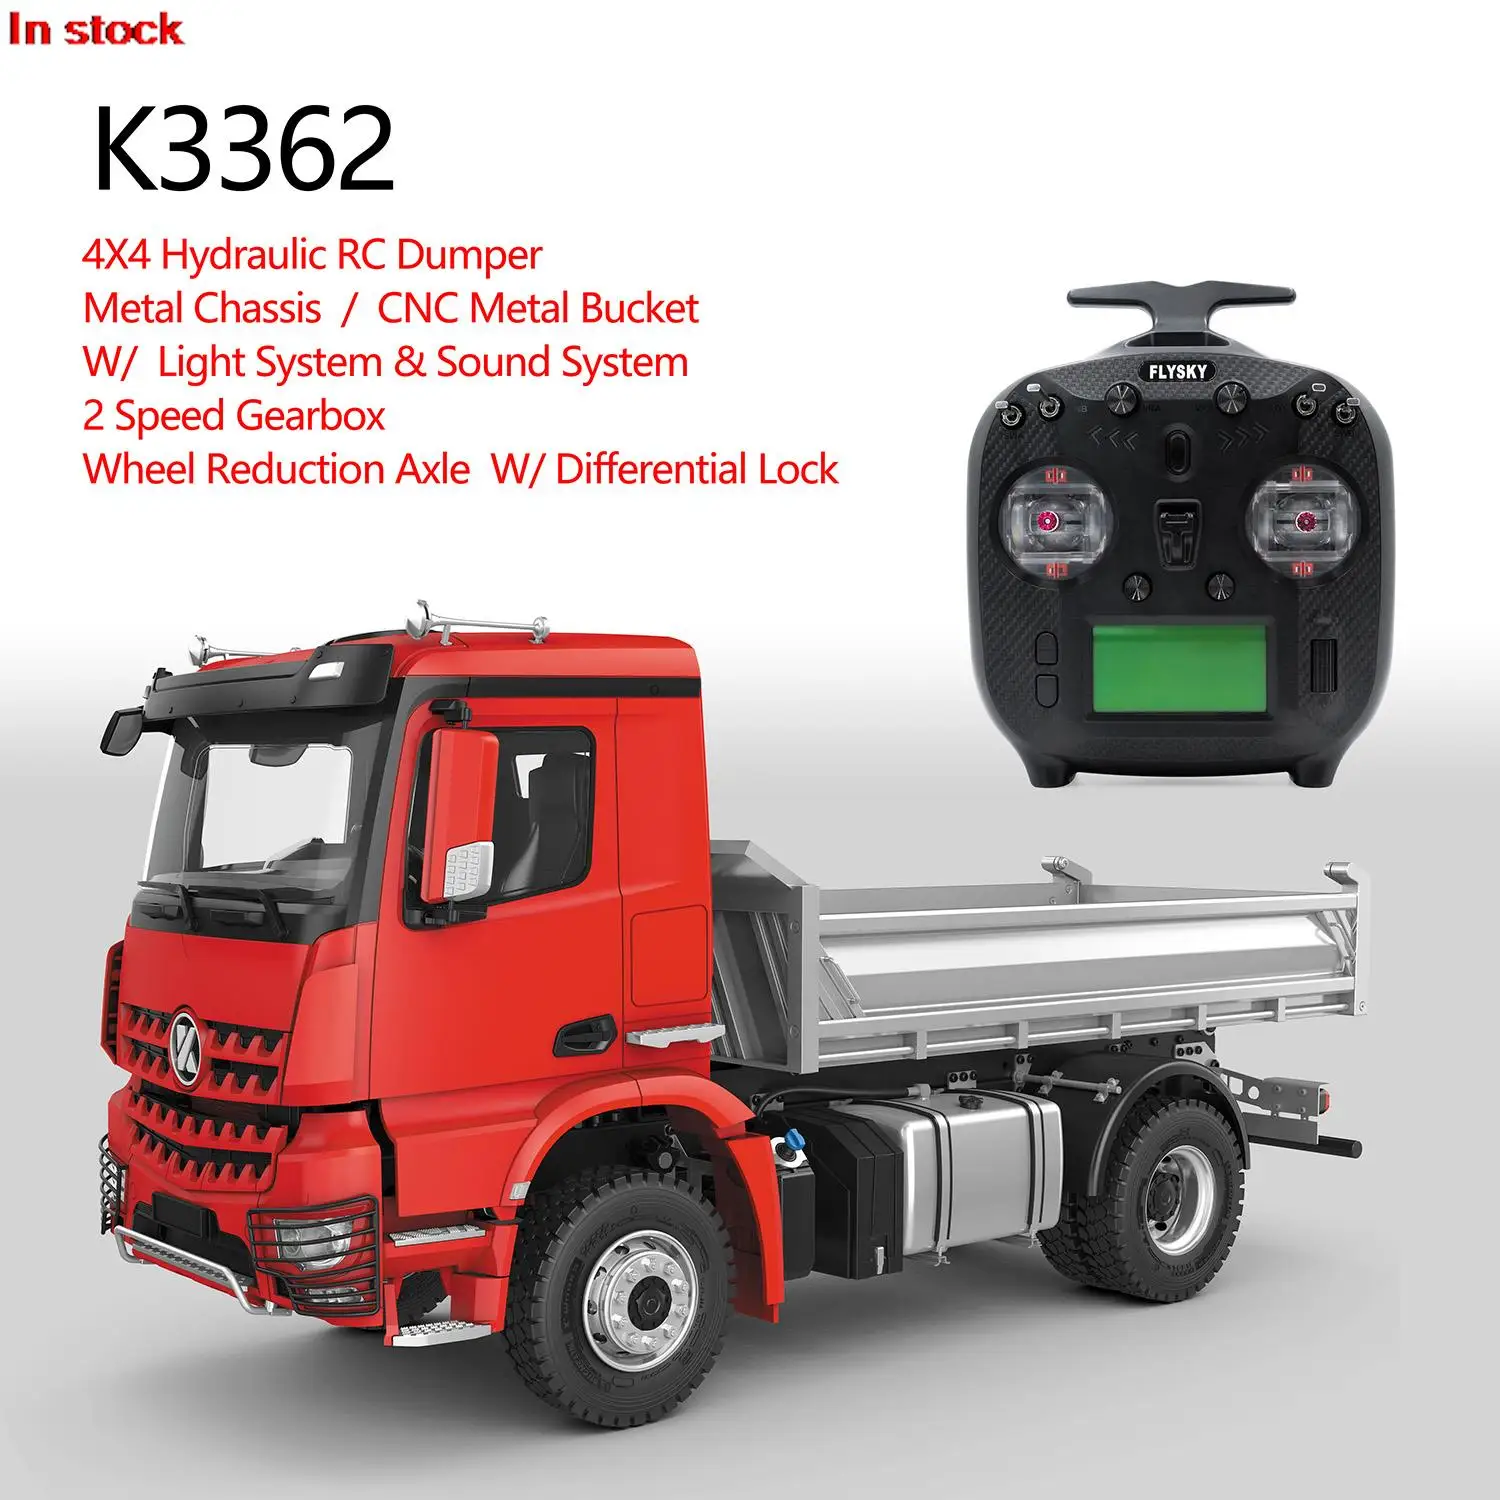 Kabolite K3362 4X4 1/14 RC Hydraulic Dumper Truck CNC Bucket Metal Chassis for Mercedes 3348 Red Deceleration Axles Servo Toys